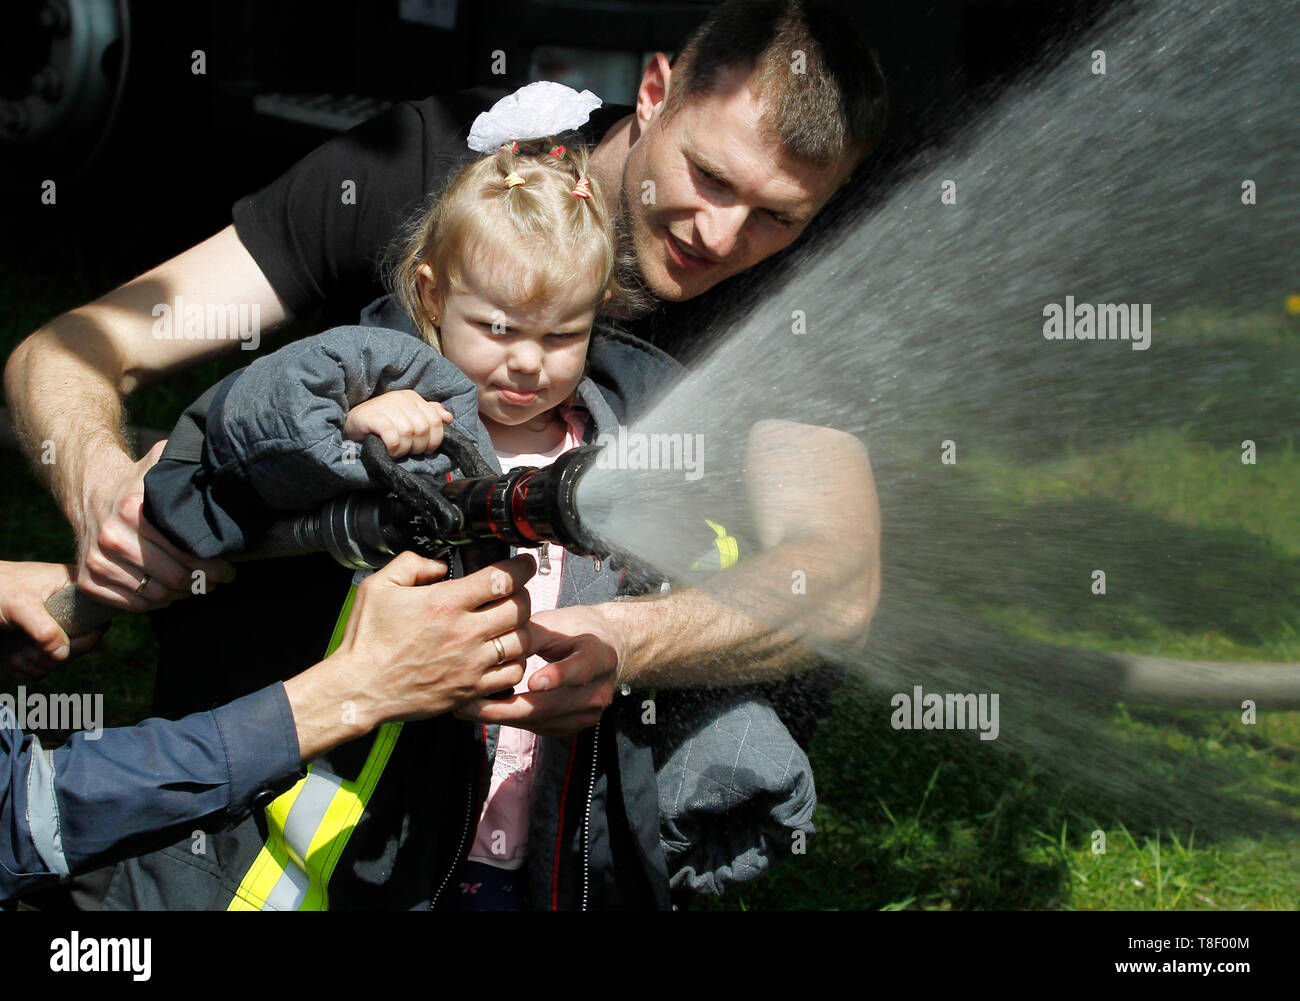 Ukrainian little girl seen pouring water from a fire hose during the festival. Children festival also called City of professions. The festival is a children's career-oriented festival exposing them to different professions like atomic engineer, businessmen, scientist, rescuers, bomb experts, policemen, doctors, social workers, criminologists, aircraft designer, firemen and other professions. Stock Photo